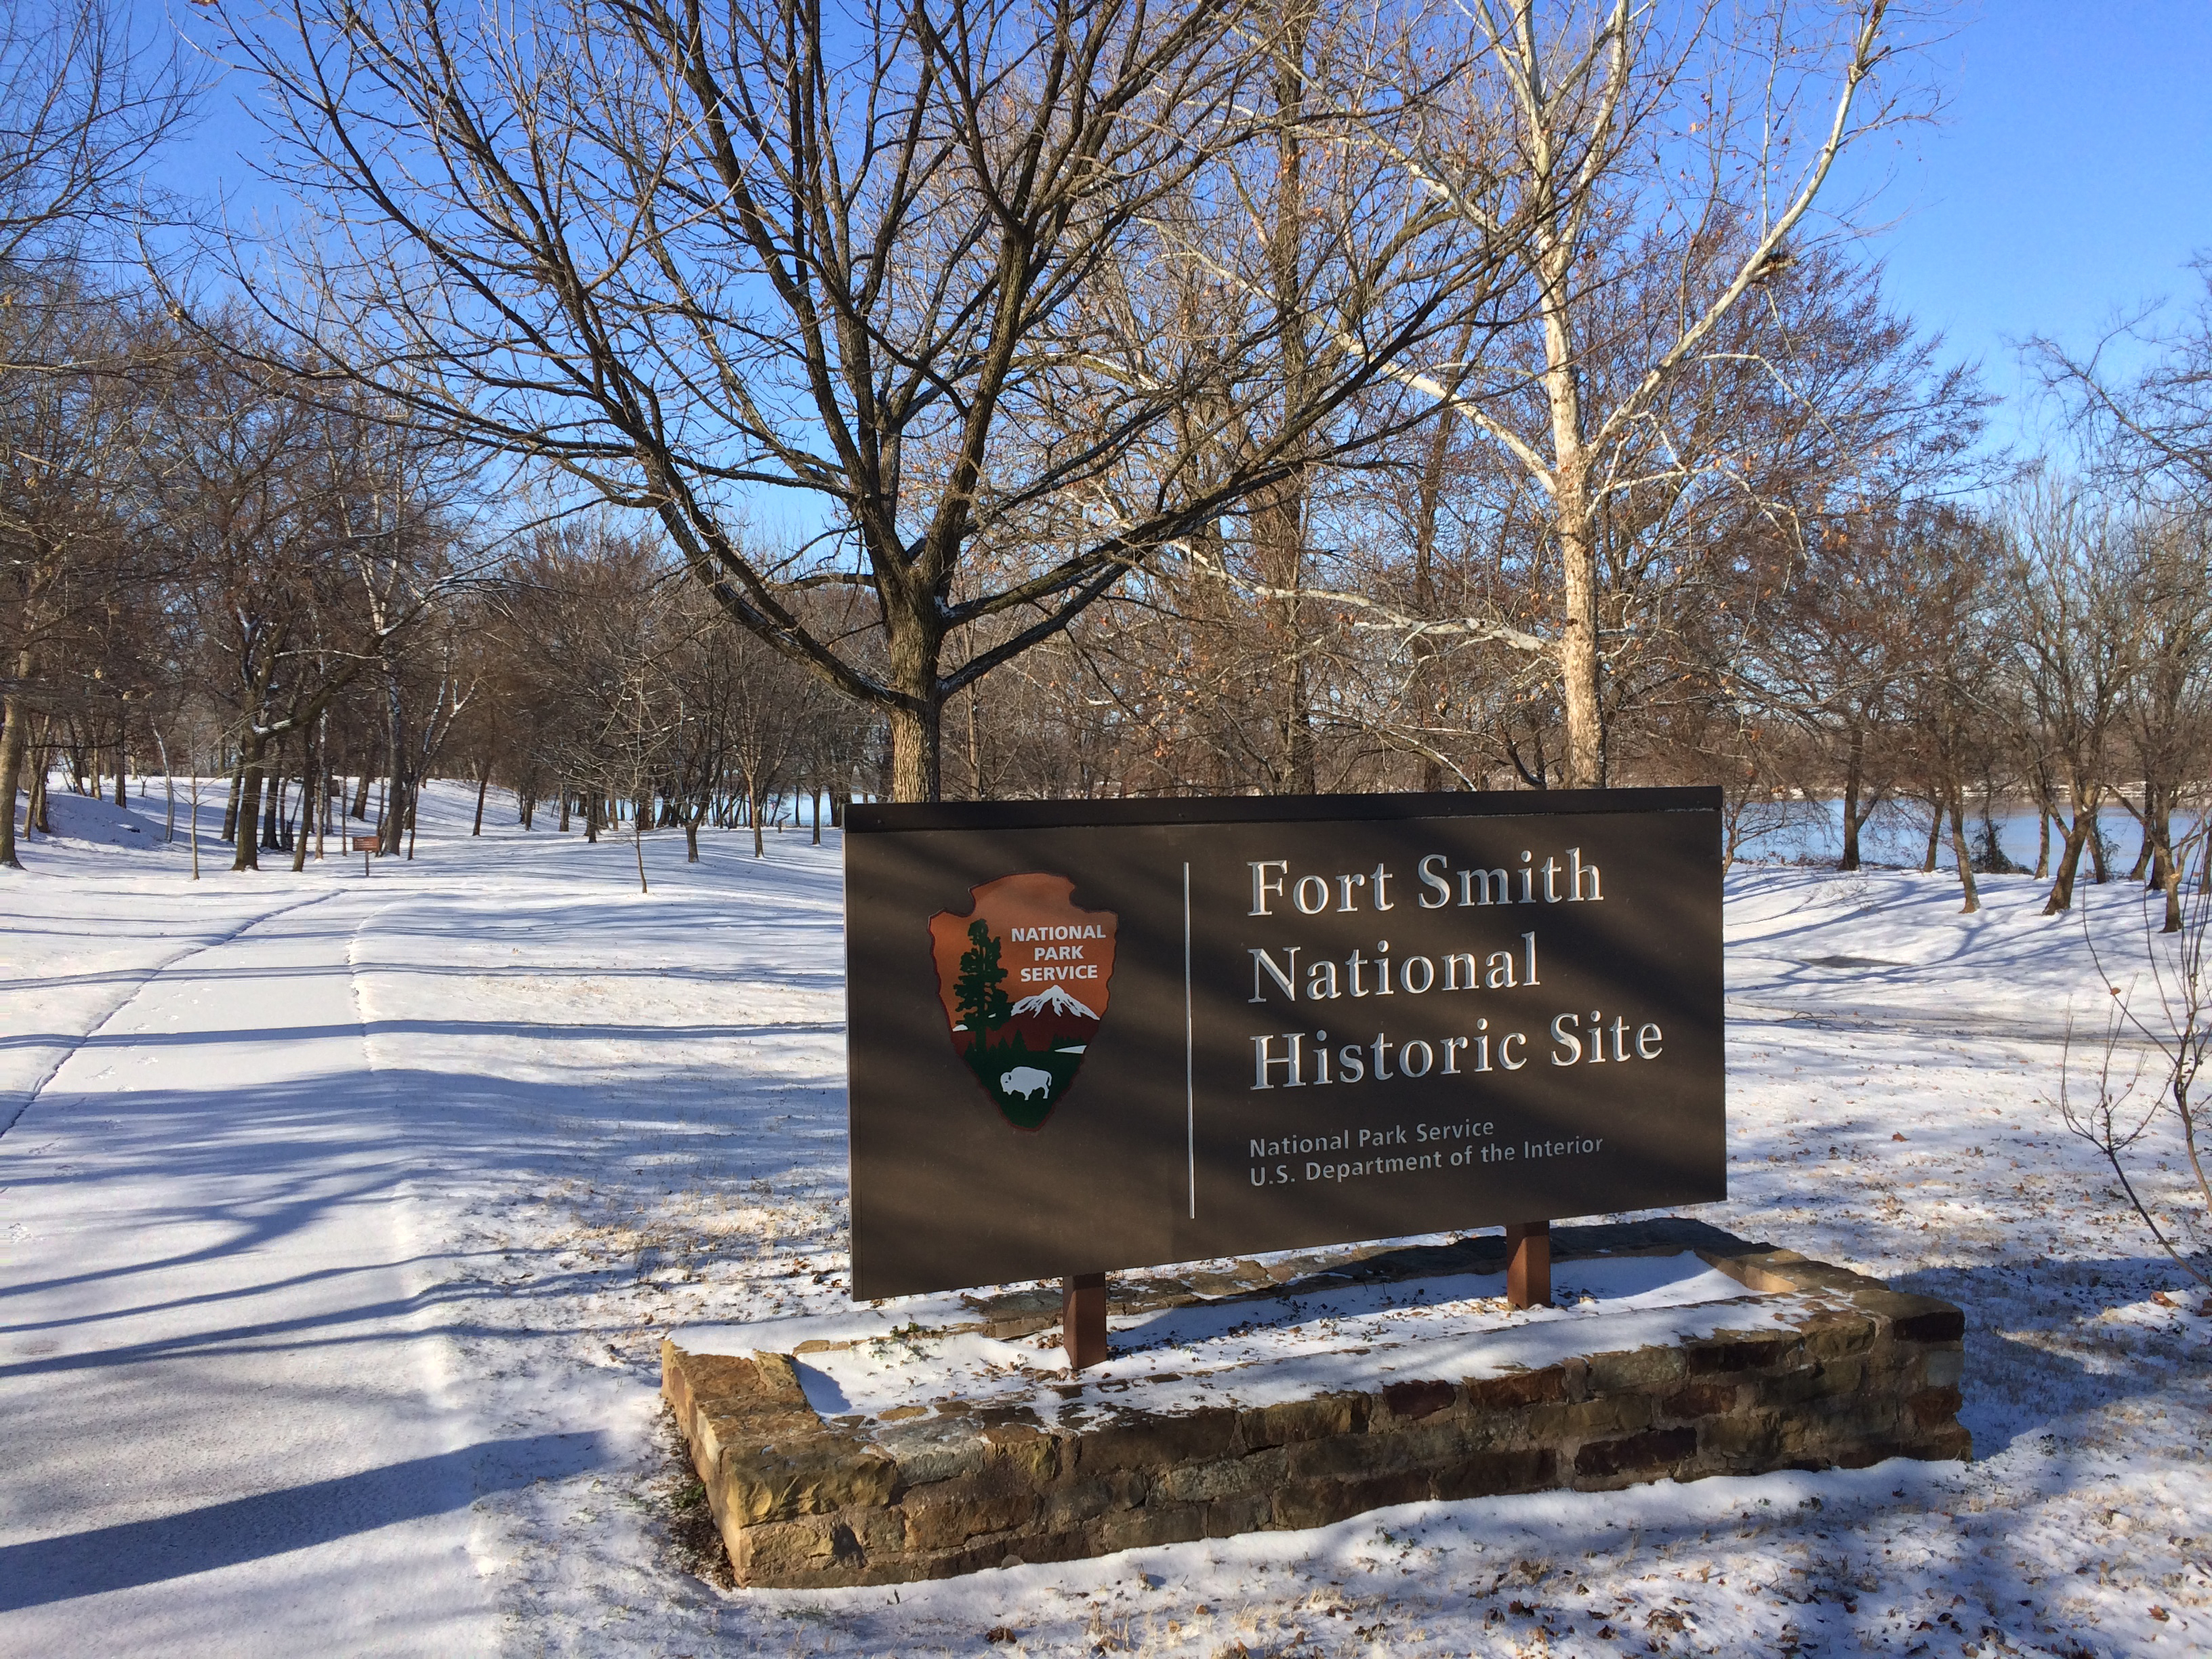 Entrance sign in snow